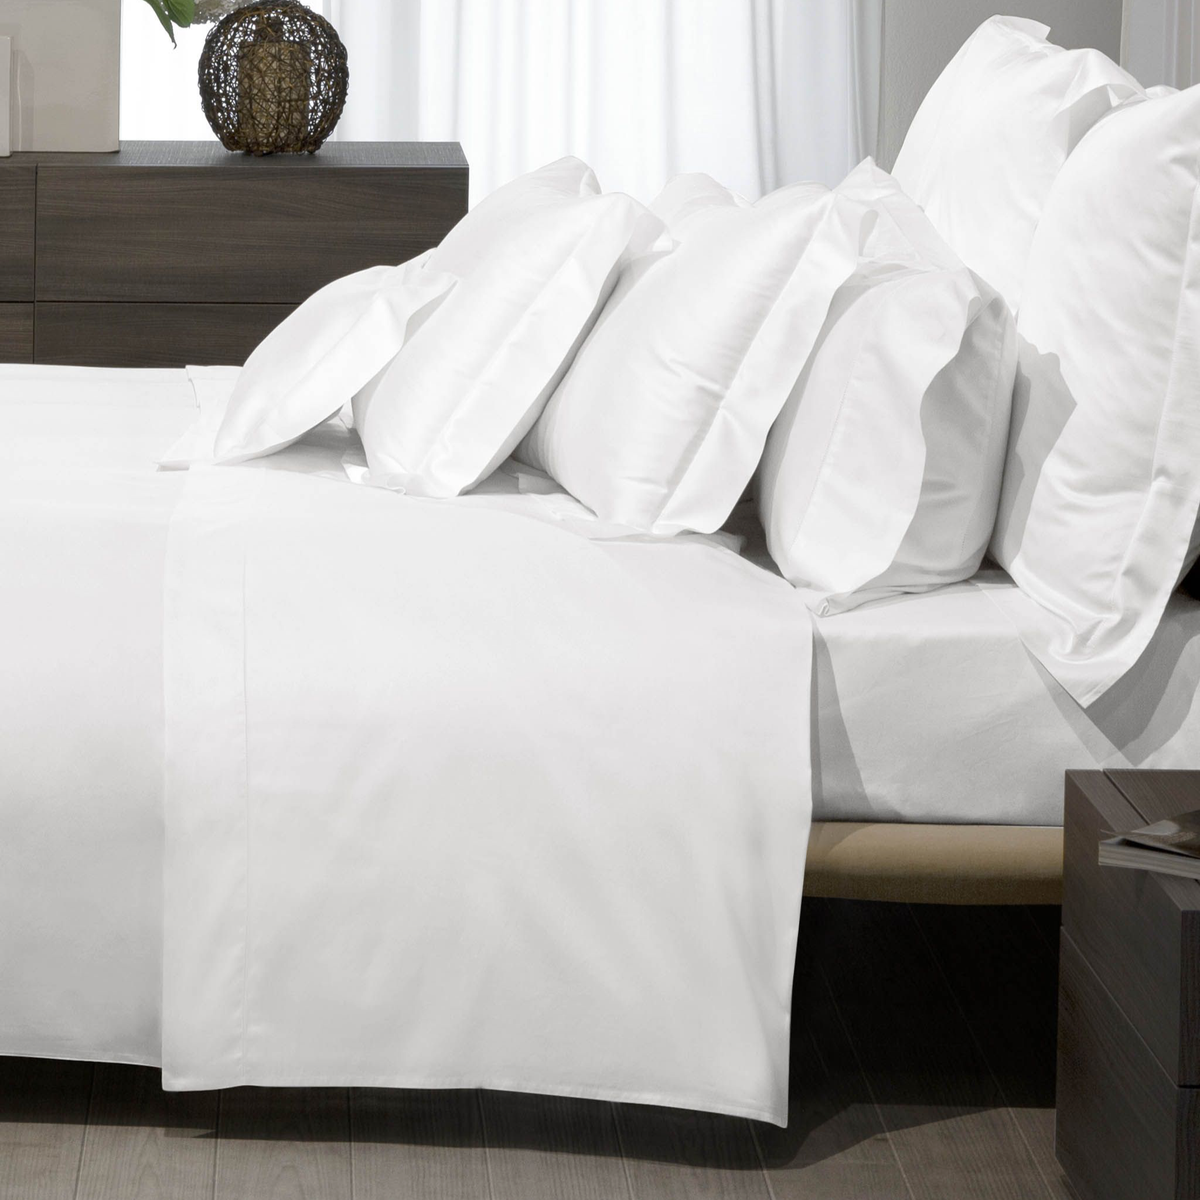 Side Detail View of White Signoria Nuvola Percale Bedding